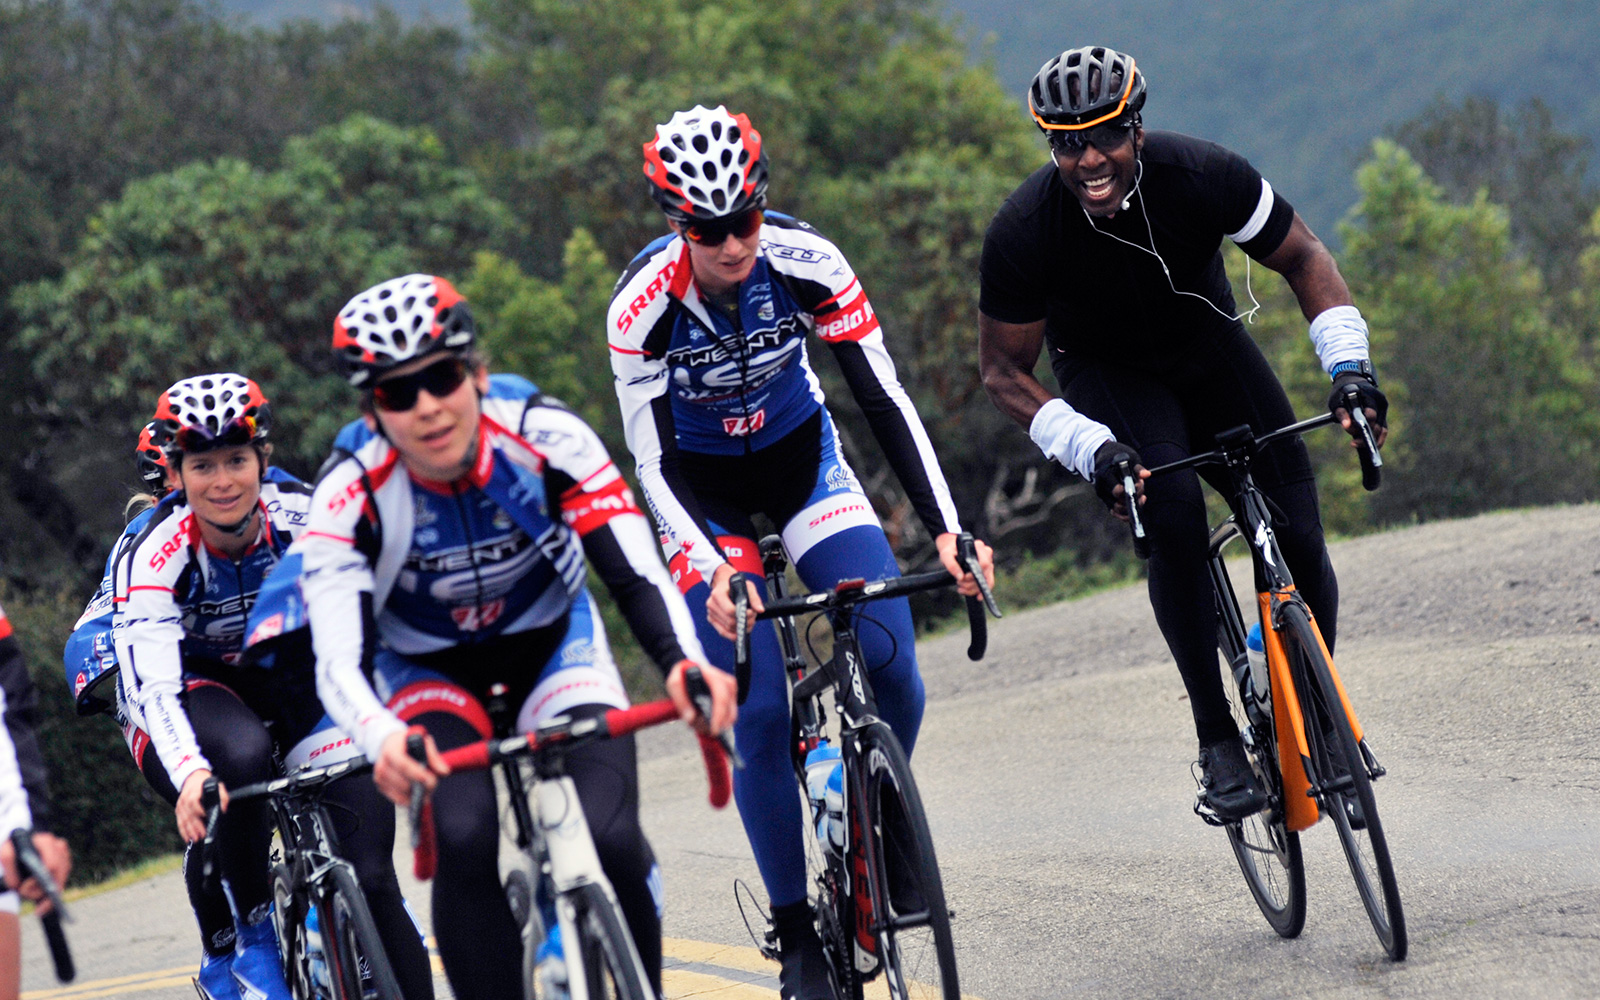 Barry Bonds uses money and resources to support women's cycling